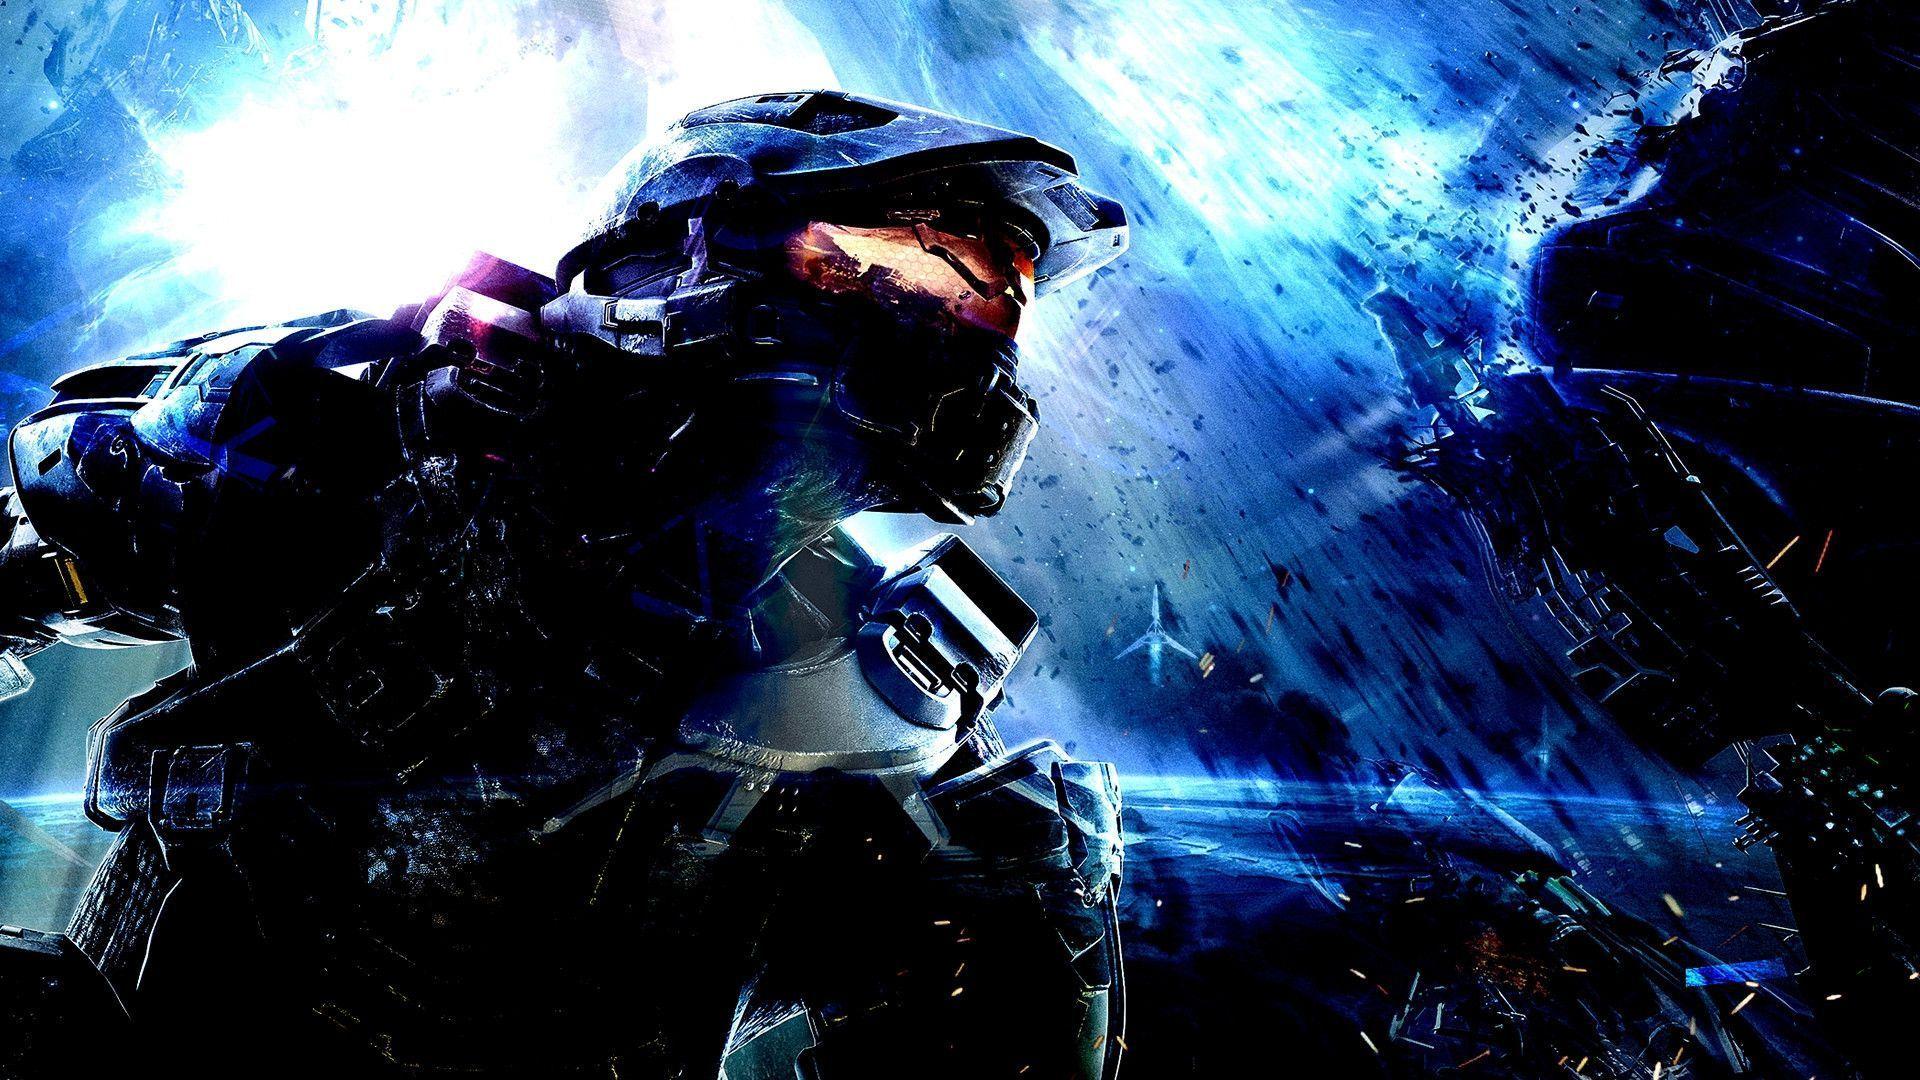 Halo Wallpaper, Full HDQ Halo Picture and Wallpaper Showcase